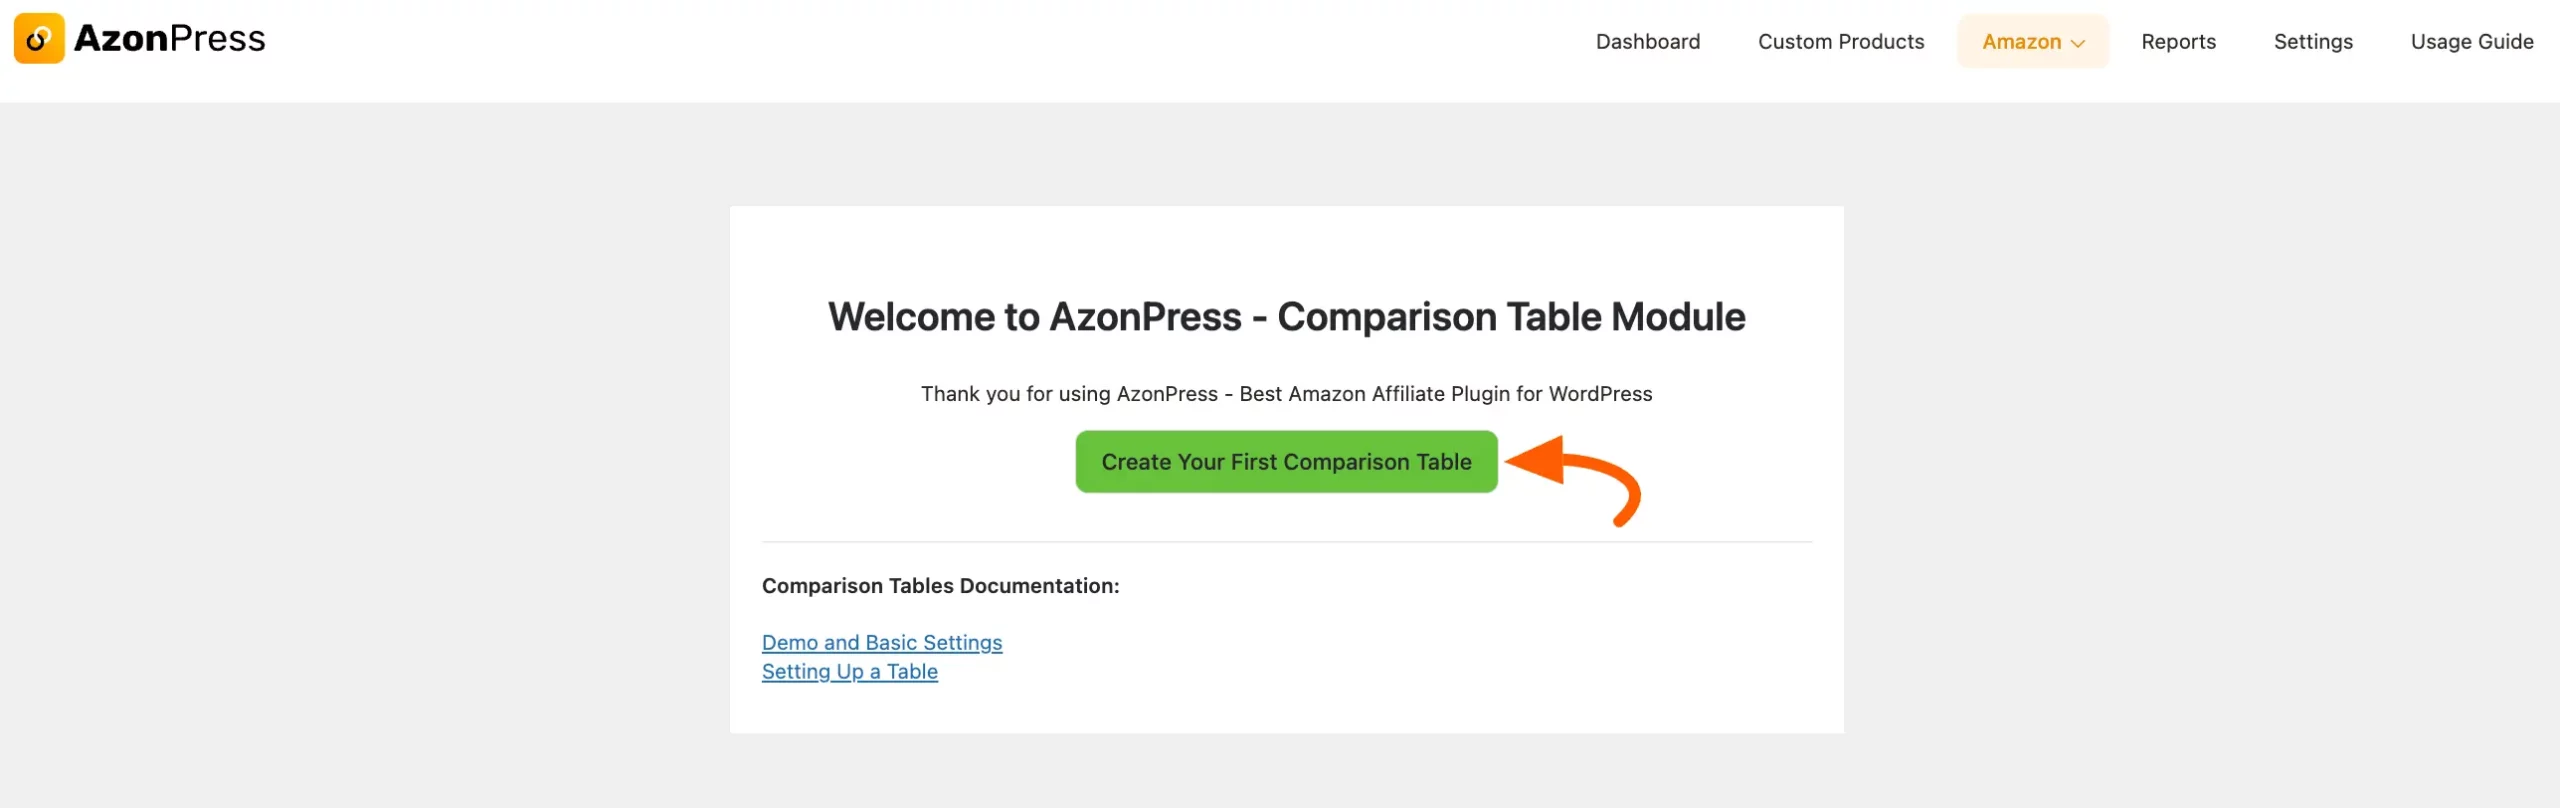 Create-your-first-comparison-table-button